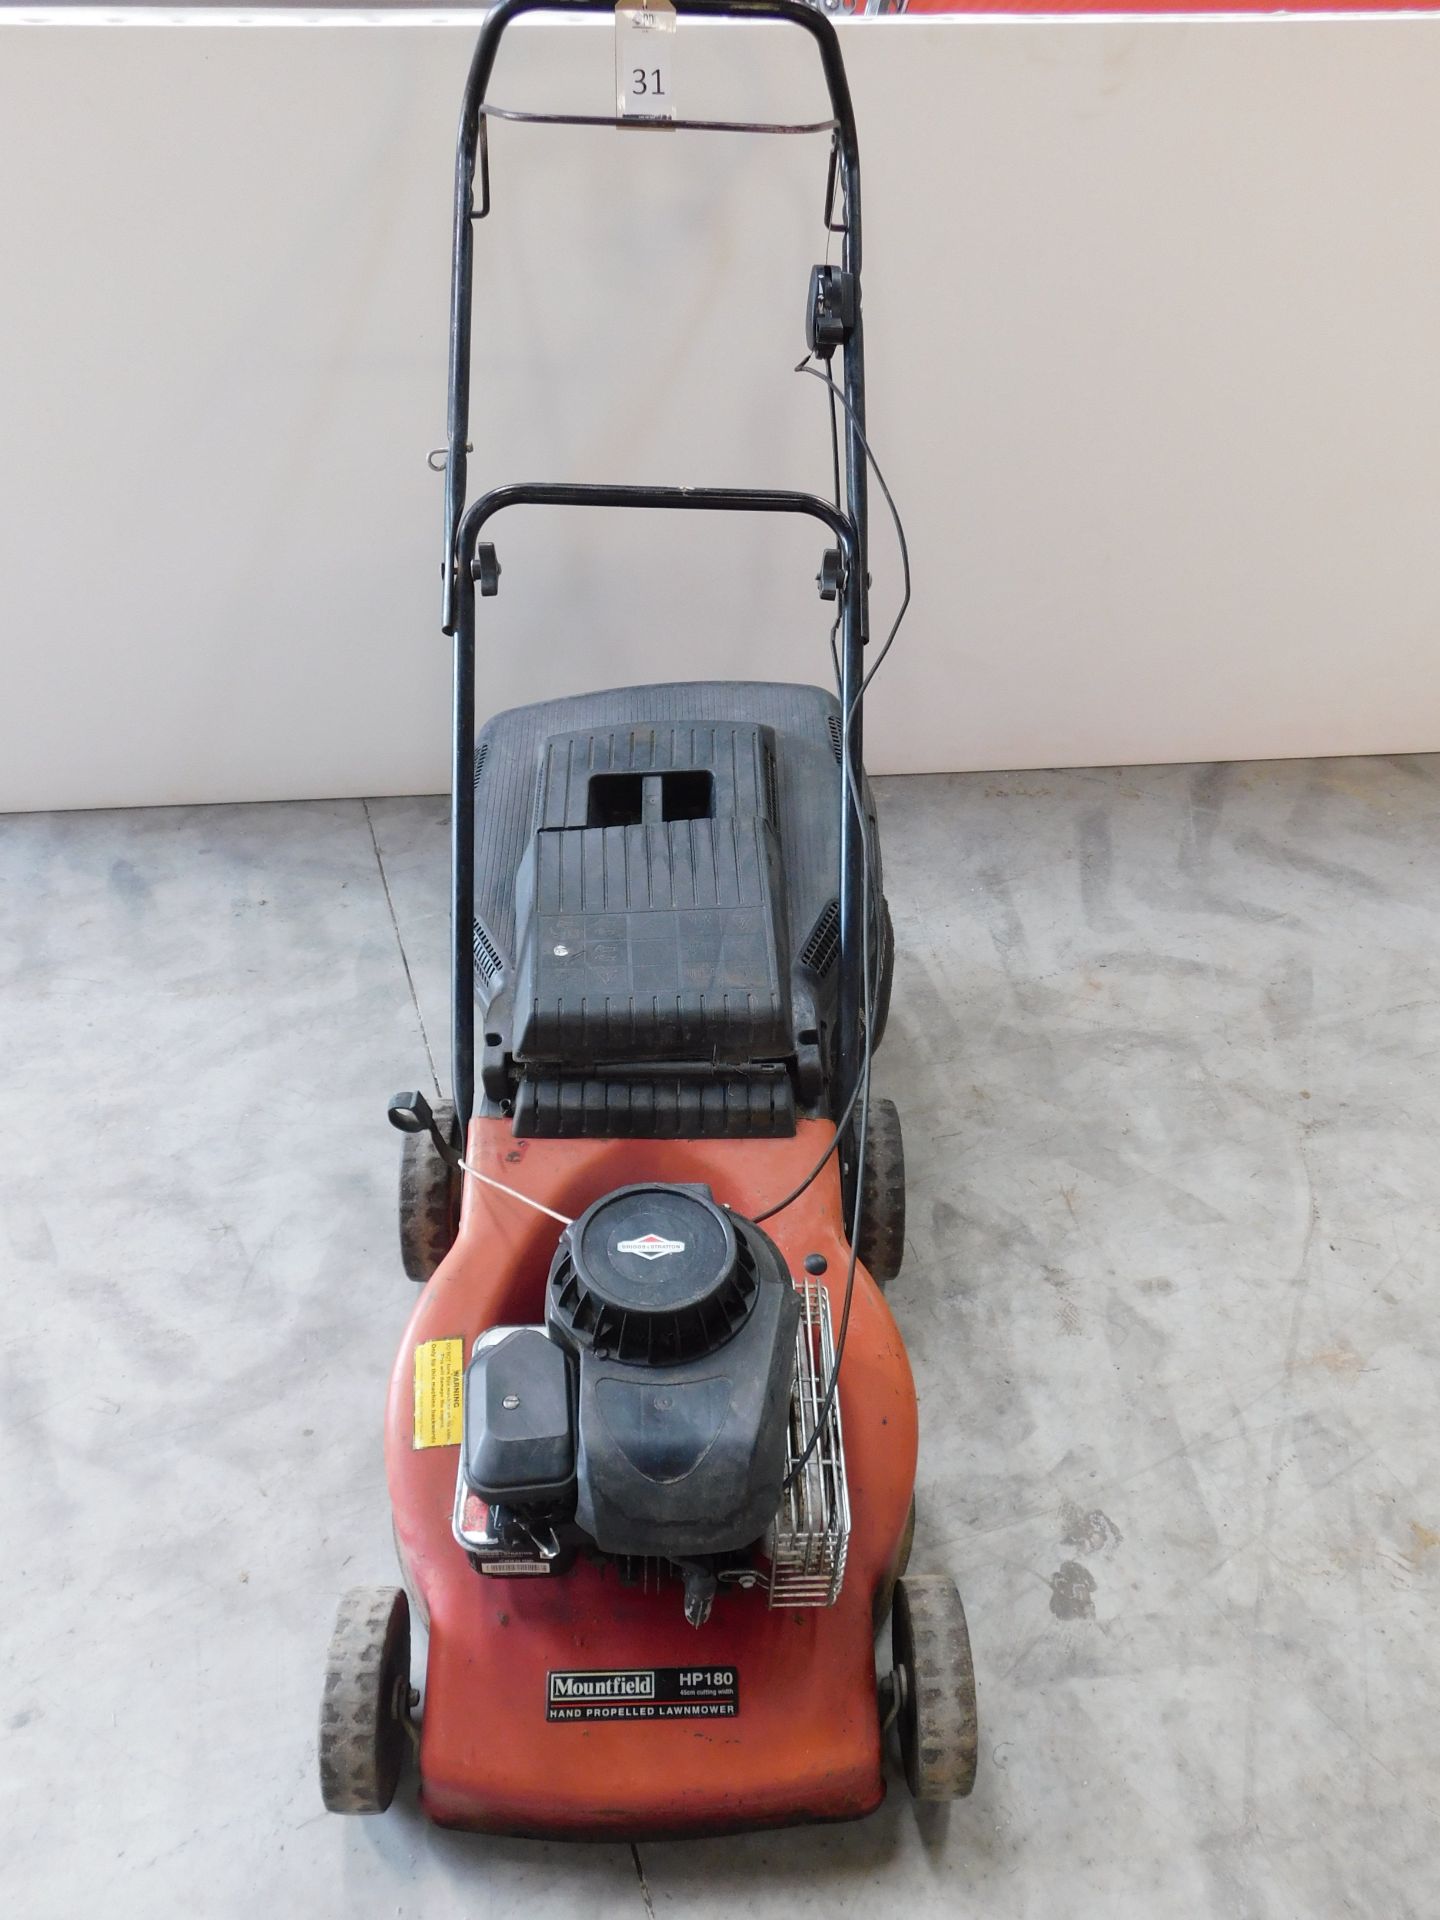 Mountfield HP180 Lawnmower with Briggs & Stratton Engine Serial Number: 1302195113165 (Location: